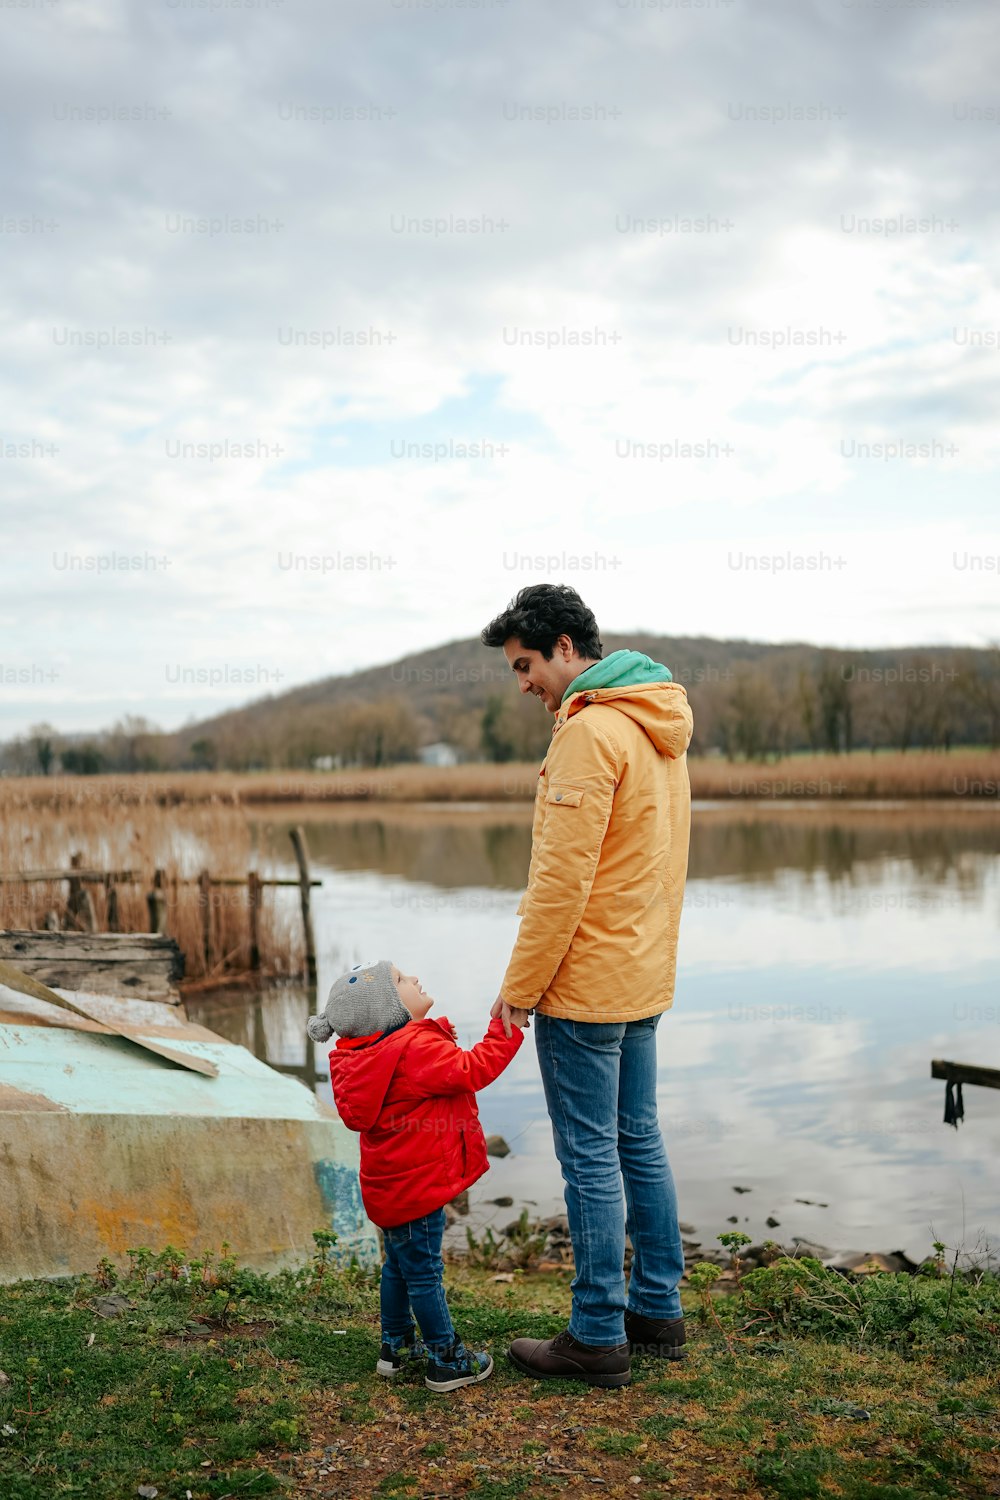 a man holding the hand of a small child near a body of water